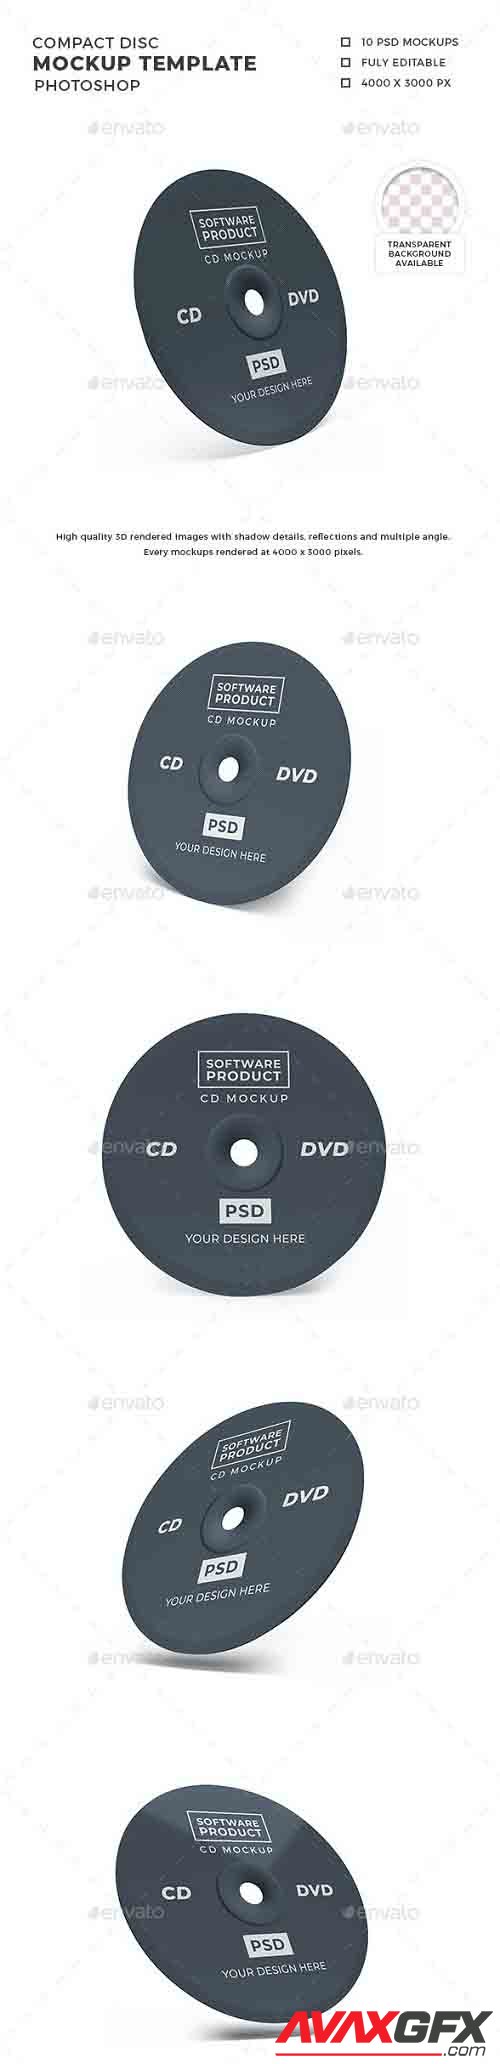 Compact Disc 3D Mockup Template - 30854896